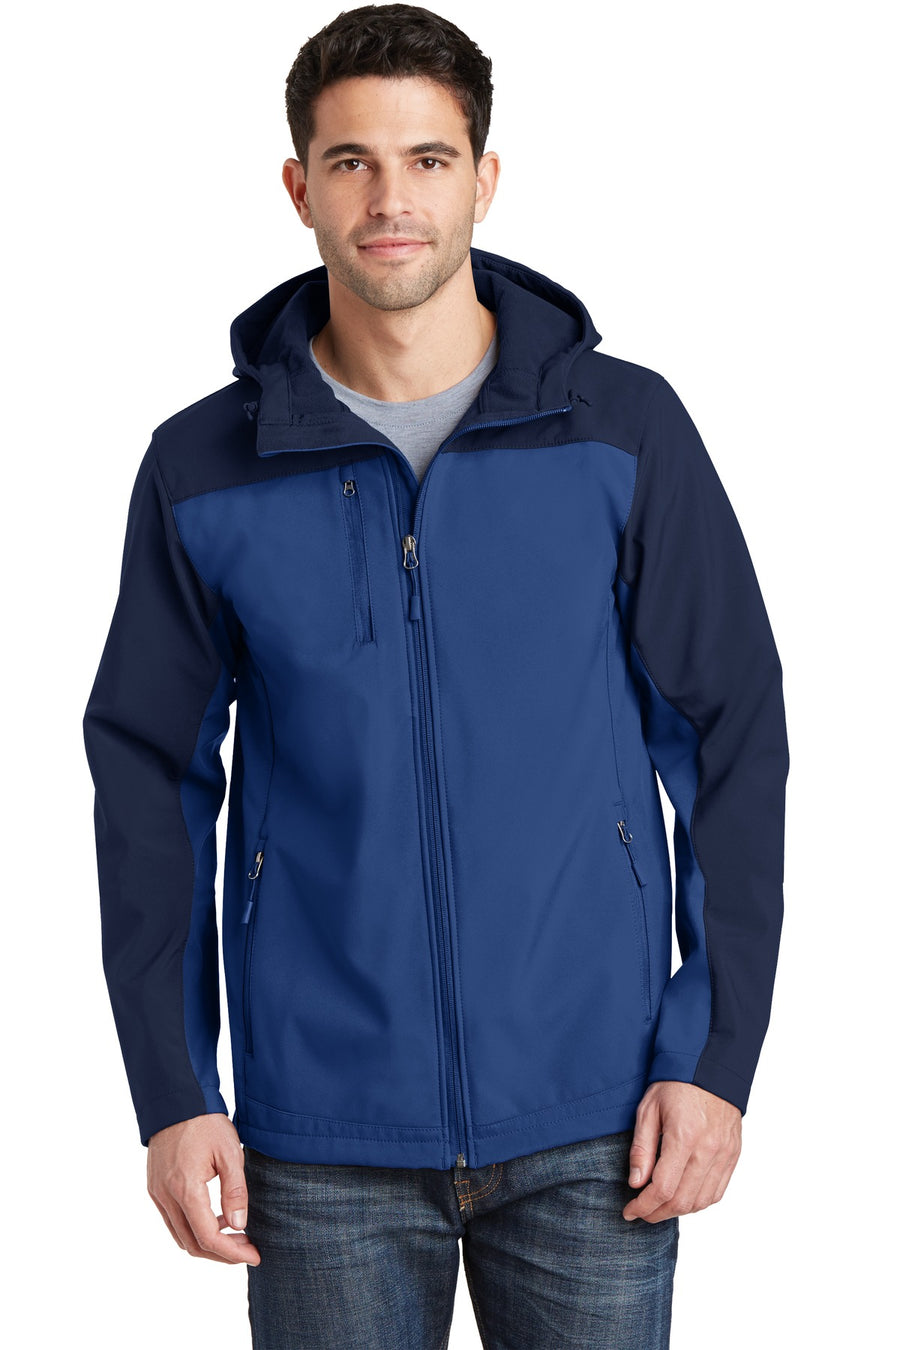 Port Authority Hooded Core Soft Shell Jacket.